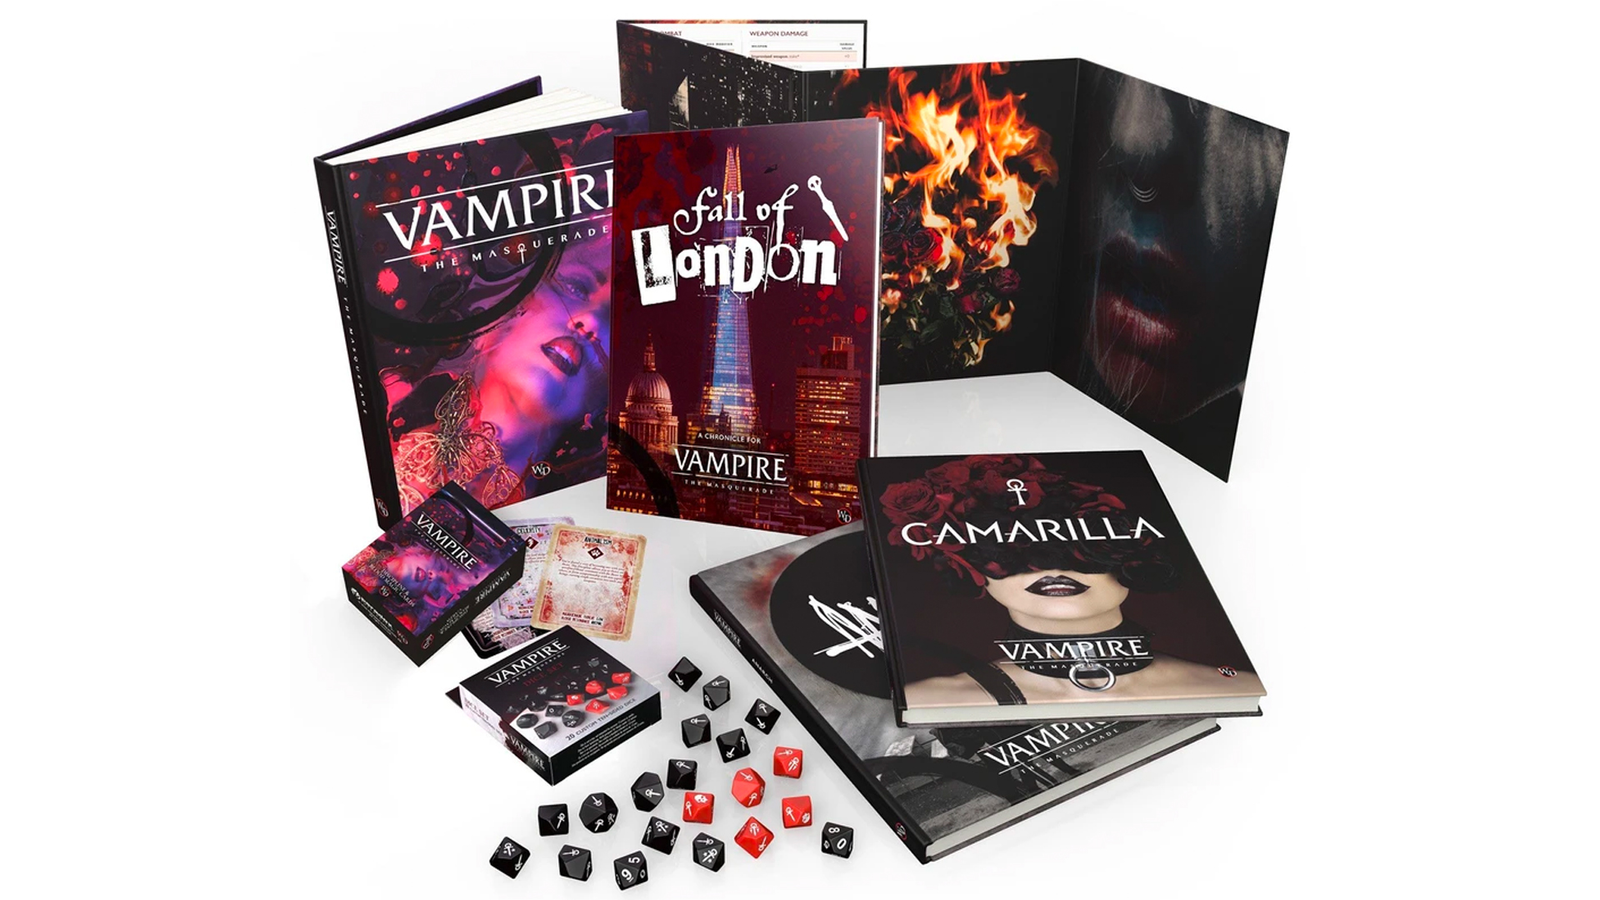 Vampire: The Masquerade - Playing V5 this weekend? Get the new rules errata  and new character sheets today at www.worldofdarkness.com! Visit the online  store at our community hub to download new, printer-friendly